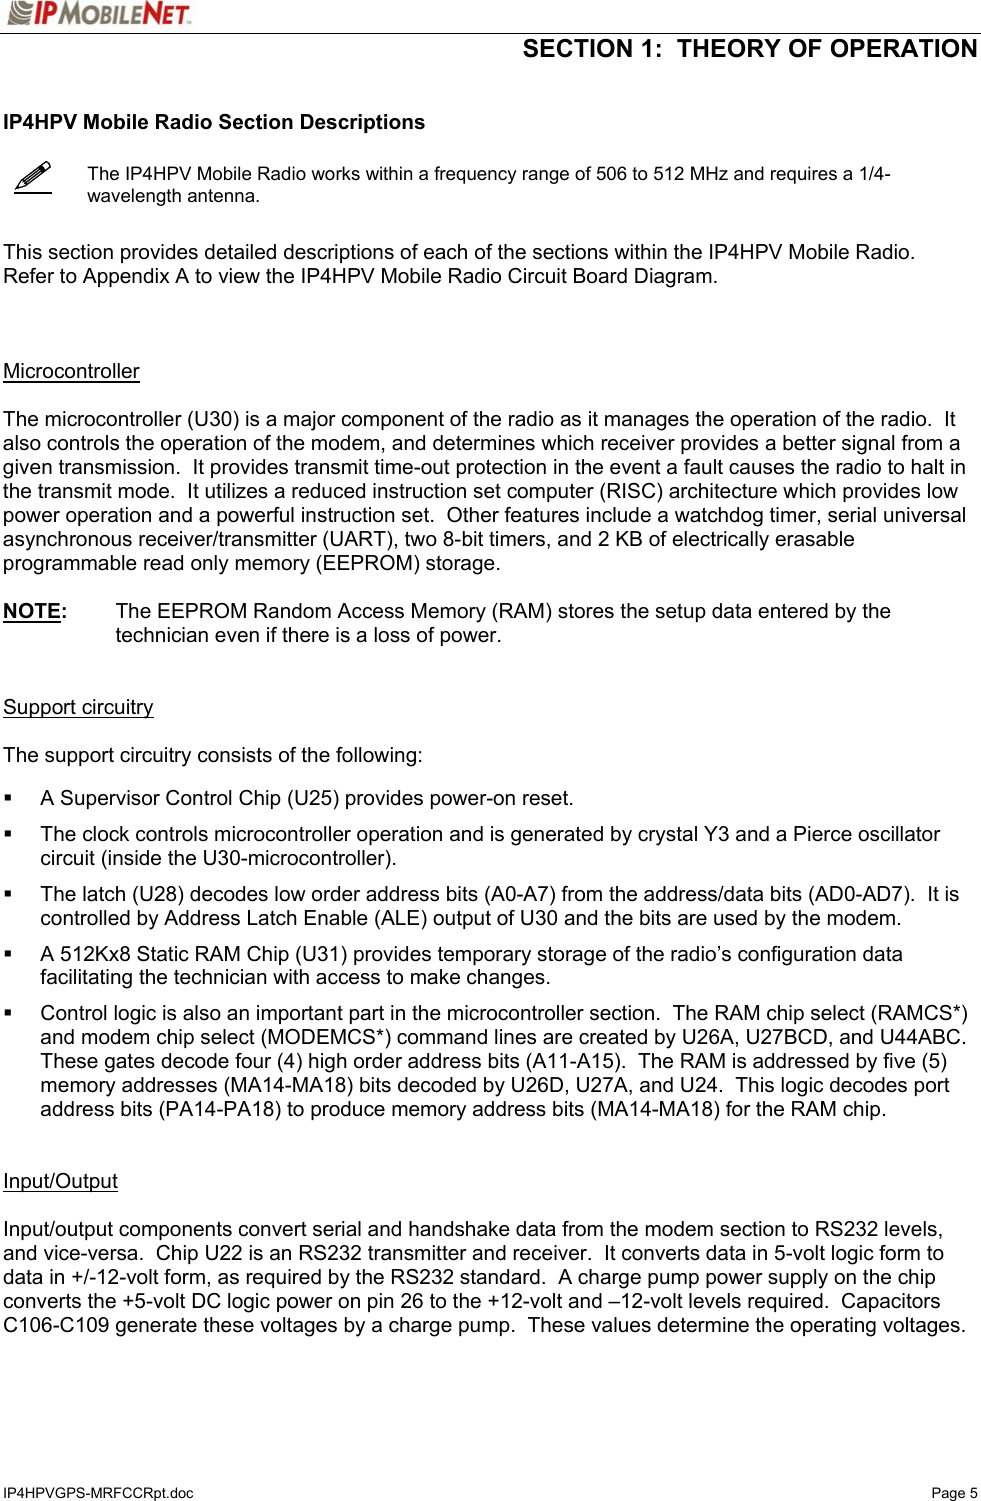  SECTION 1:  THEORY OF OPERATION  IP4HPVGPS-MRFCCRpt.doc   Page 5    IP4HPV Mobile Radio Section Descriptions     The IP4HPV Mobile Radio works within a frequency range of 506 to 512 MHz and requires a 1/4-wavelength antenna.   This section provides detailed descriptions of each of the sections within the IP4HPV Mobile Radio.  Refer to Appendix A to view the IP4HPV Mobile Radio Circuit Board Diagram.    Microcontroller  The microcontroller (U30) is a major component of the radio as it manages the operation of the radio.  It also controls the operation of the modem, and determines which receiver provides a better signal from a given transmission.  It provides transmit time-out protection in the event a fault causes the radio to halt in the transmit mode.  It utilizes a reduced instruction set computer (RISC) architecture which provides low power operation and a powerful instruction set.  Other features include a watchdog timer, serial universal asynchronous receiver/transmitter (UART), two 8-bit timers, and 2 KB of electrically erasable programmable read only memory (EEPROM) storage.  NOTE:  The EEPROM Random Access Memory (RAM) stores the setup data entered by the technician even if there is a loss of power.   Support circuitry  The support circuitry consists of the following:      A Supervisor Control Chip (U25) provides power-on reset.    The clock controls microcontroller operation and is generated by crystal Y3 and a Pierce oscillator circuit (inside the U30-microcontroller).    The latch (U28) decodes low order address bits (A0-A7) from the address/data bits (AD0-AD7).  It is controlled by Address Latch Enable (ALE) output of U30 and the bits are used by the modem.    A 512Kx8 Static RAM Chip (U31) provides temporary storage of the radio’s configuration data facilitating the technician with access to make changes.    Control logic is also an important part in the microcontroller section.  The RAM chip select (RAMCS*) and modem chip select (MODEMCS*) command lines are created by U26A, U27BCD, and U44ABC.  These gates decode four (4) high order address bits (A11-A15).  The RAM is addressed by five (5) memory addresses (MA14-MA18) bits decoded by U26D, U27A, and U24.  This logic decodes port address bits (PA14-PA18) to produce memory address bits (MA14-MA18) for the RAM chip.   Input/Output  Input/output components convert serial and handshake data from the modem section to RS232 levels, and vice-versa.  Chip U22 is an RS232 transmitter and receiver.  It converts data in 5-volt logic form to data in +/-12-volt form, as required by the RS232 standard.  A charge pump power supply on the chip converts the +5-volt DC logic power on pin 26 to the +12-volt and –12-volt levels required.  Capacitors C106-C109 generate these voltages by a charge pump.  These values determine the operating voltages.  